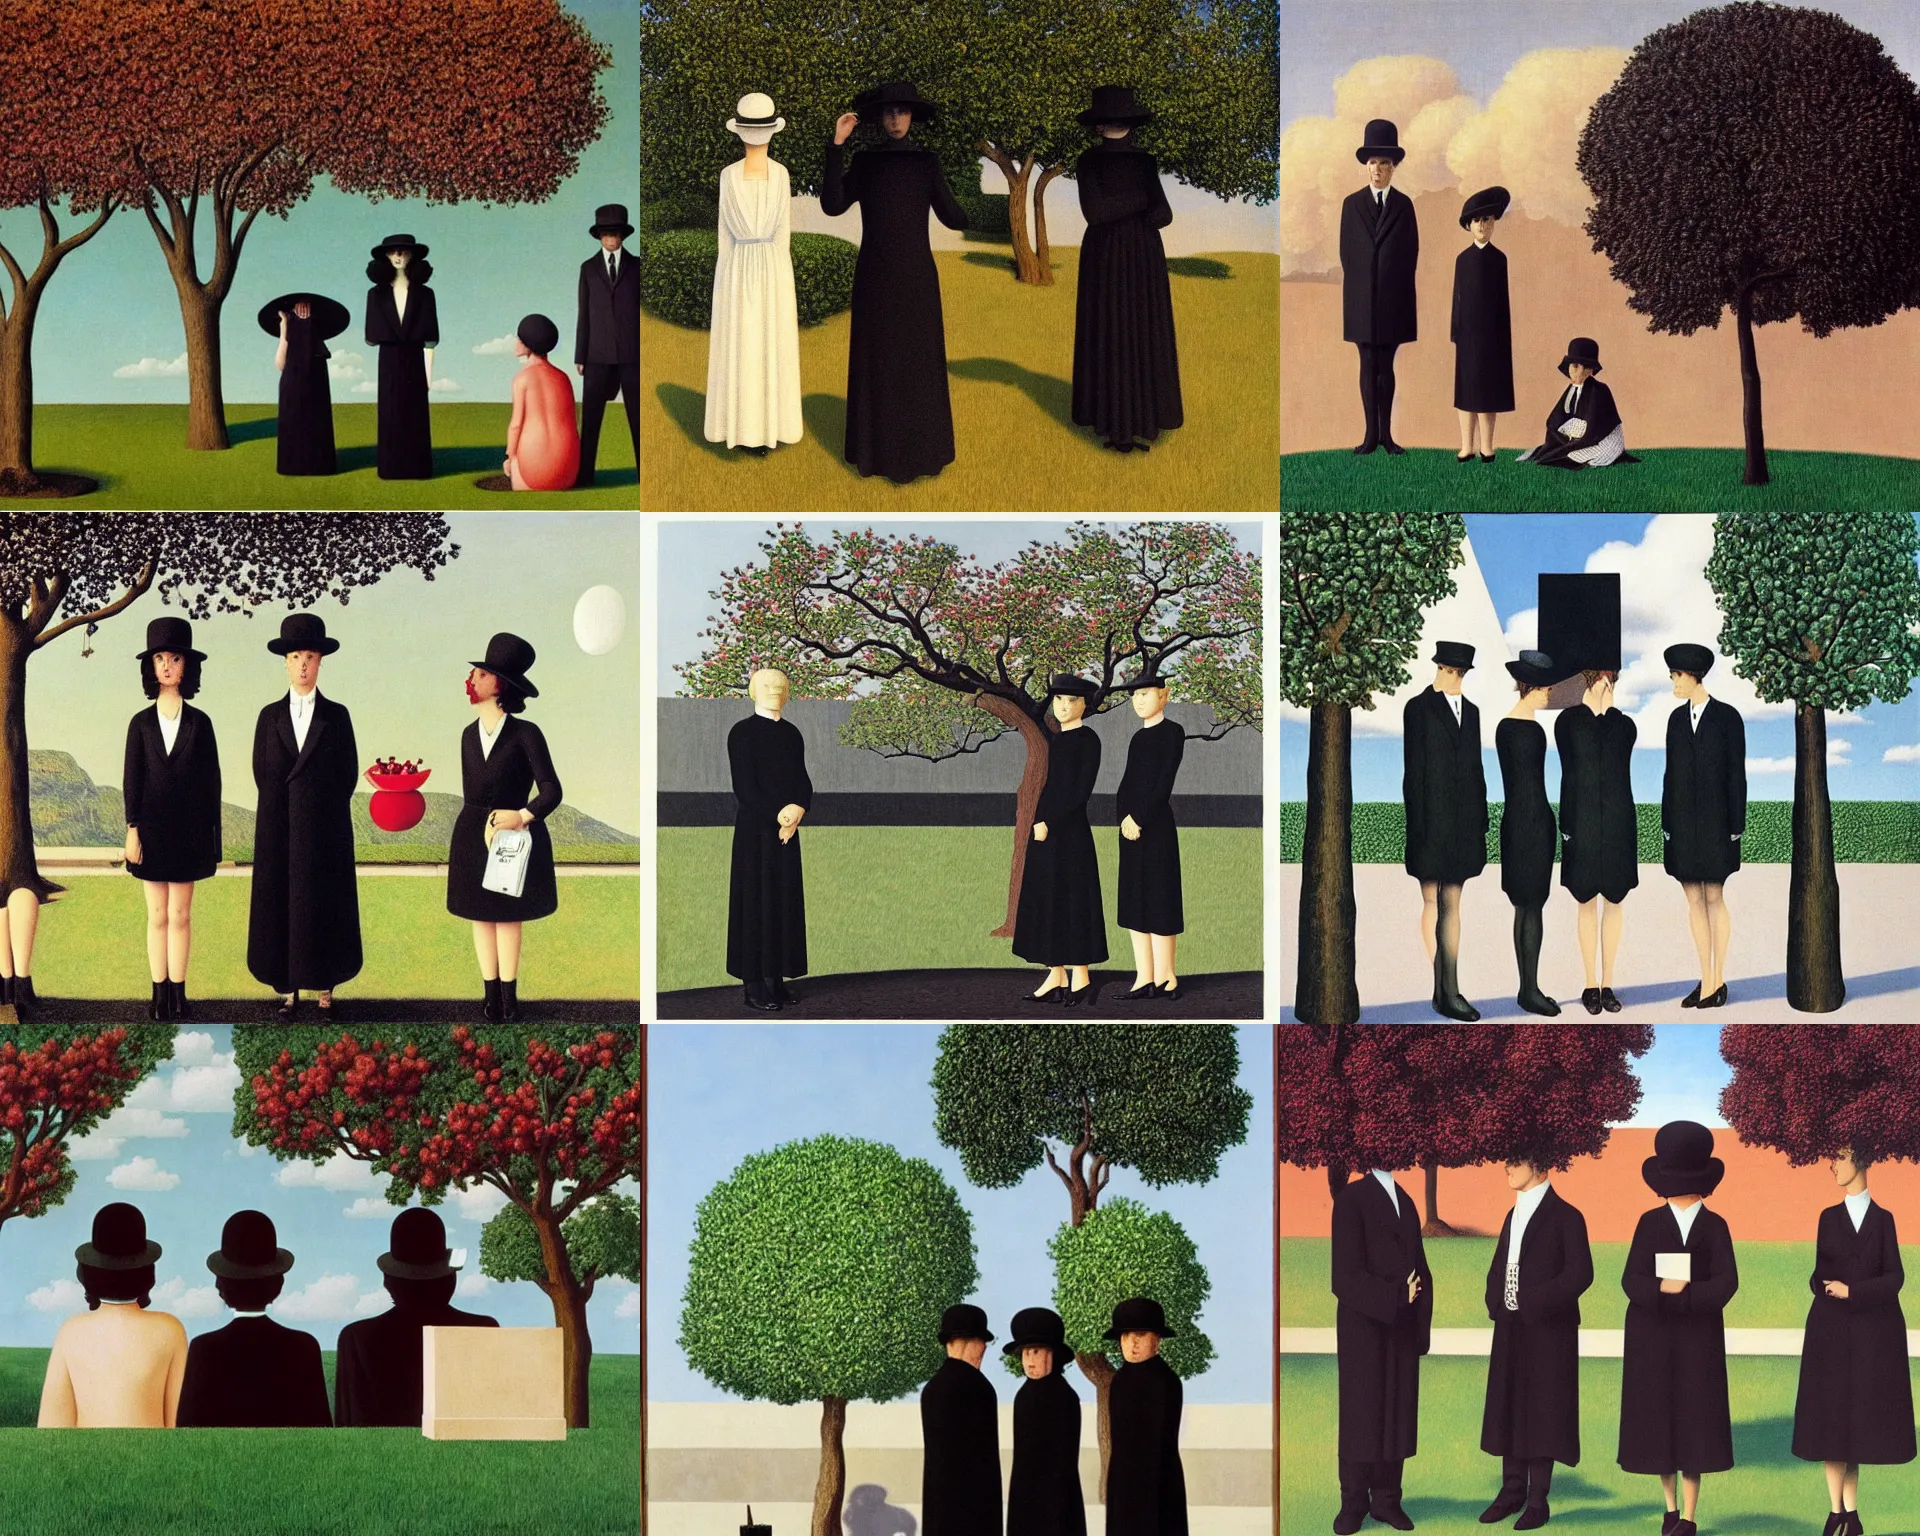 Prompt: hd art by rene magritte. three goths loitering in the shade, talking beneath a cherry tree outside a blockbuster video store.